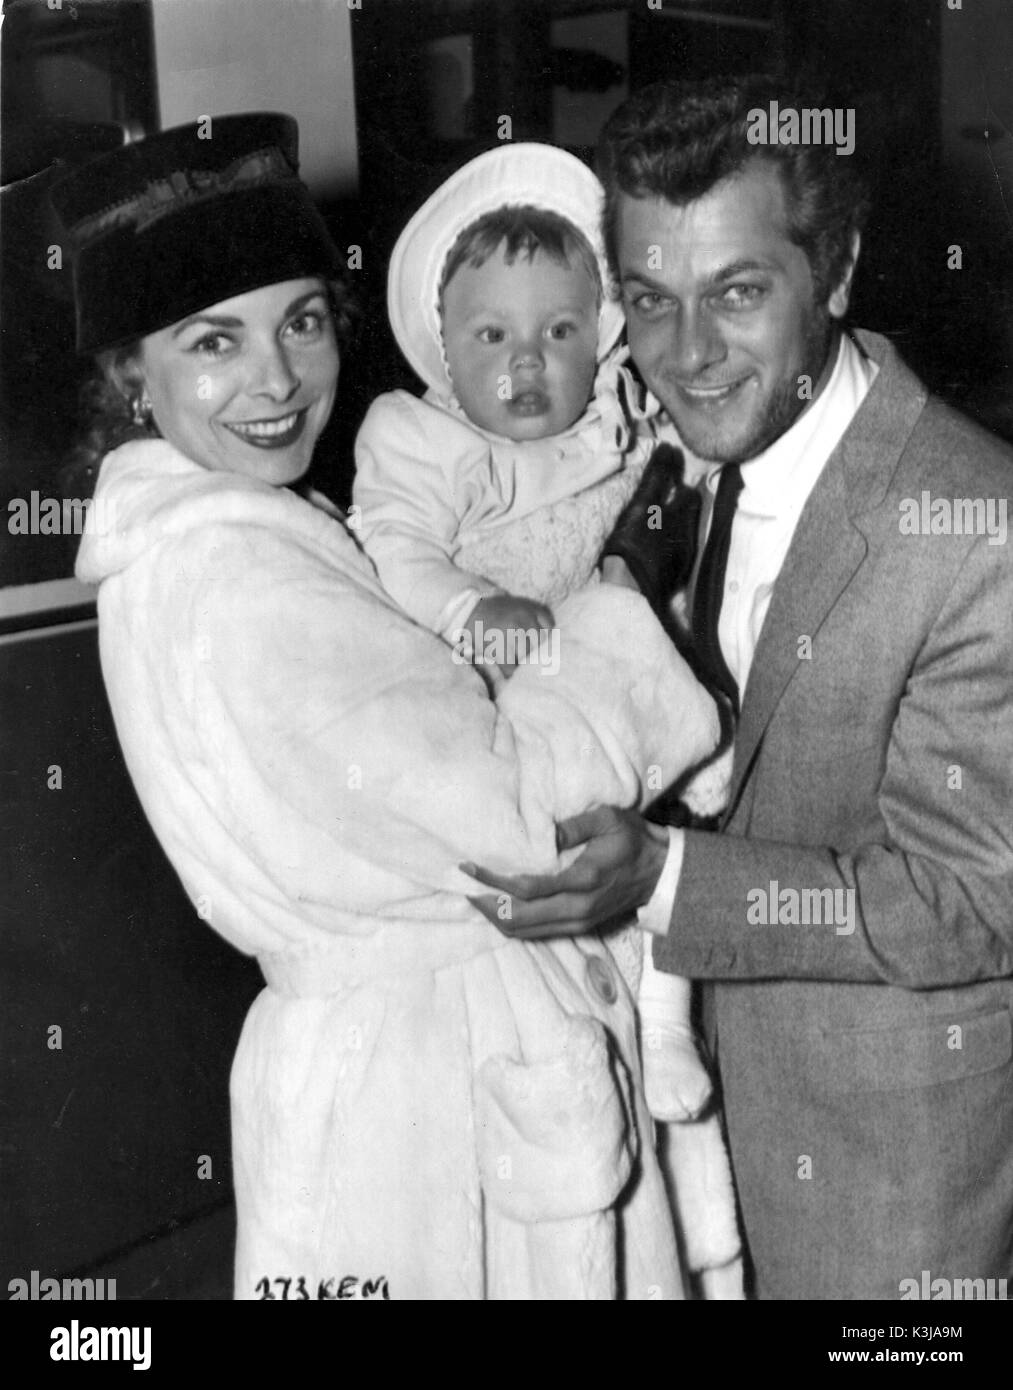 TONY CURTIS & JANET LEIGH Married 1951 - 1962 with their first daughter, KELLY CURTIS TONY CURTIS & JANET LEIGH Married 1951 - 1962 with their first daughter, KELLY CURTIS Stock Photo